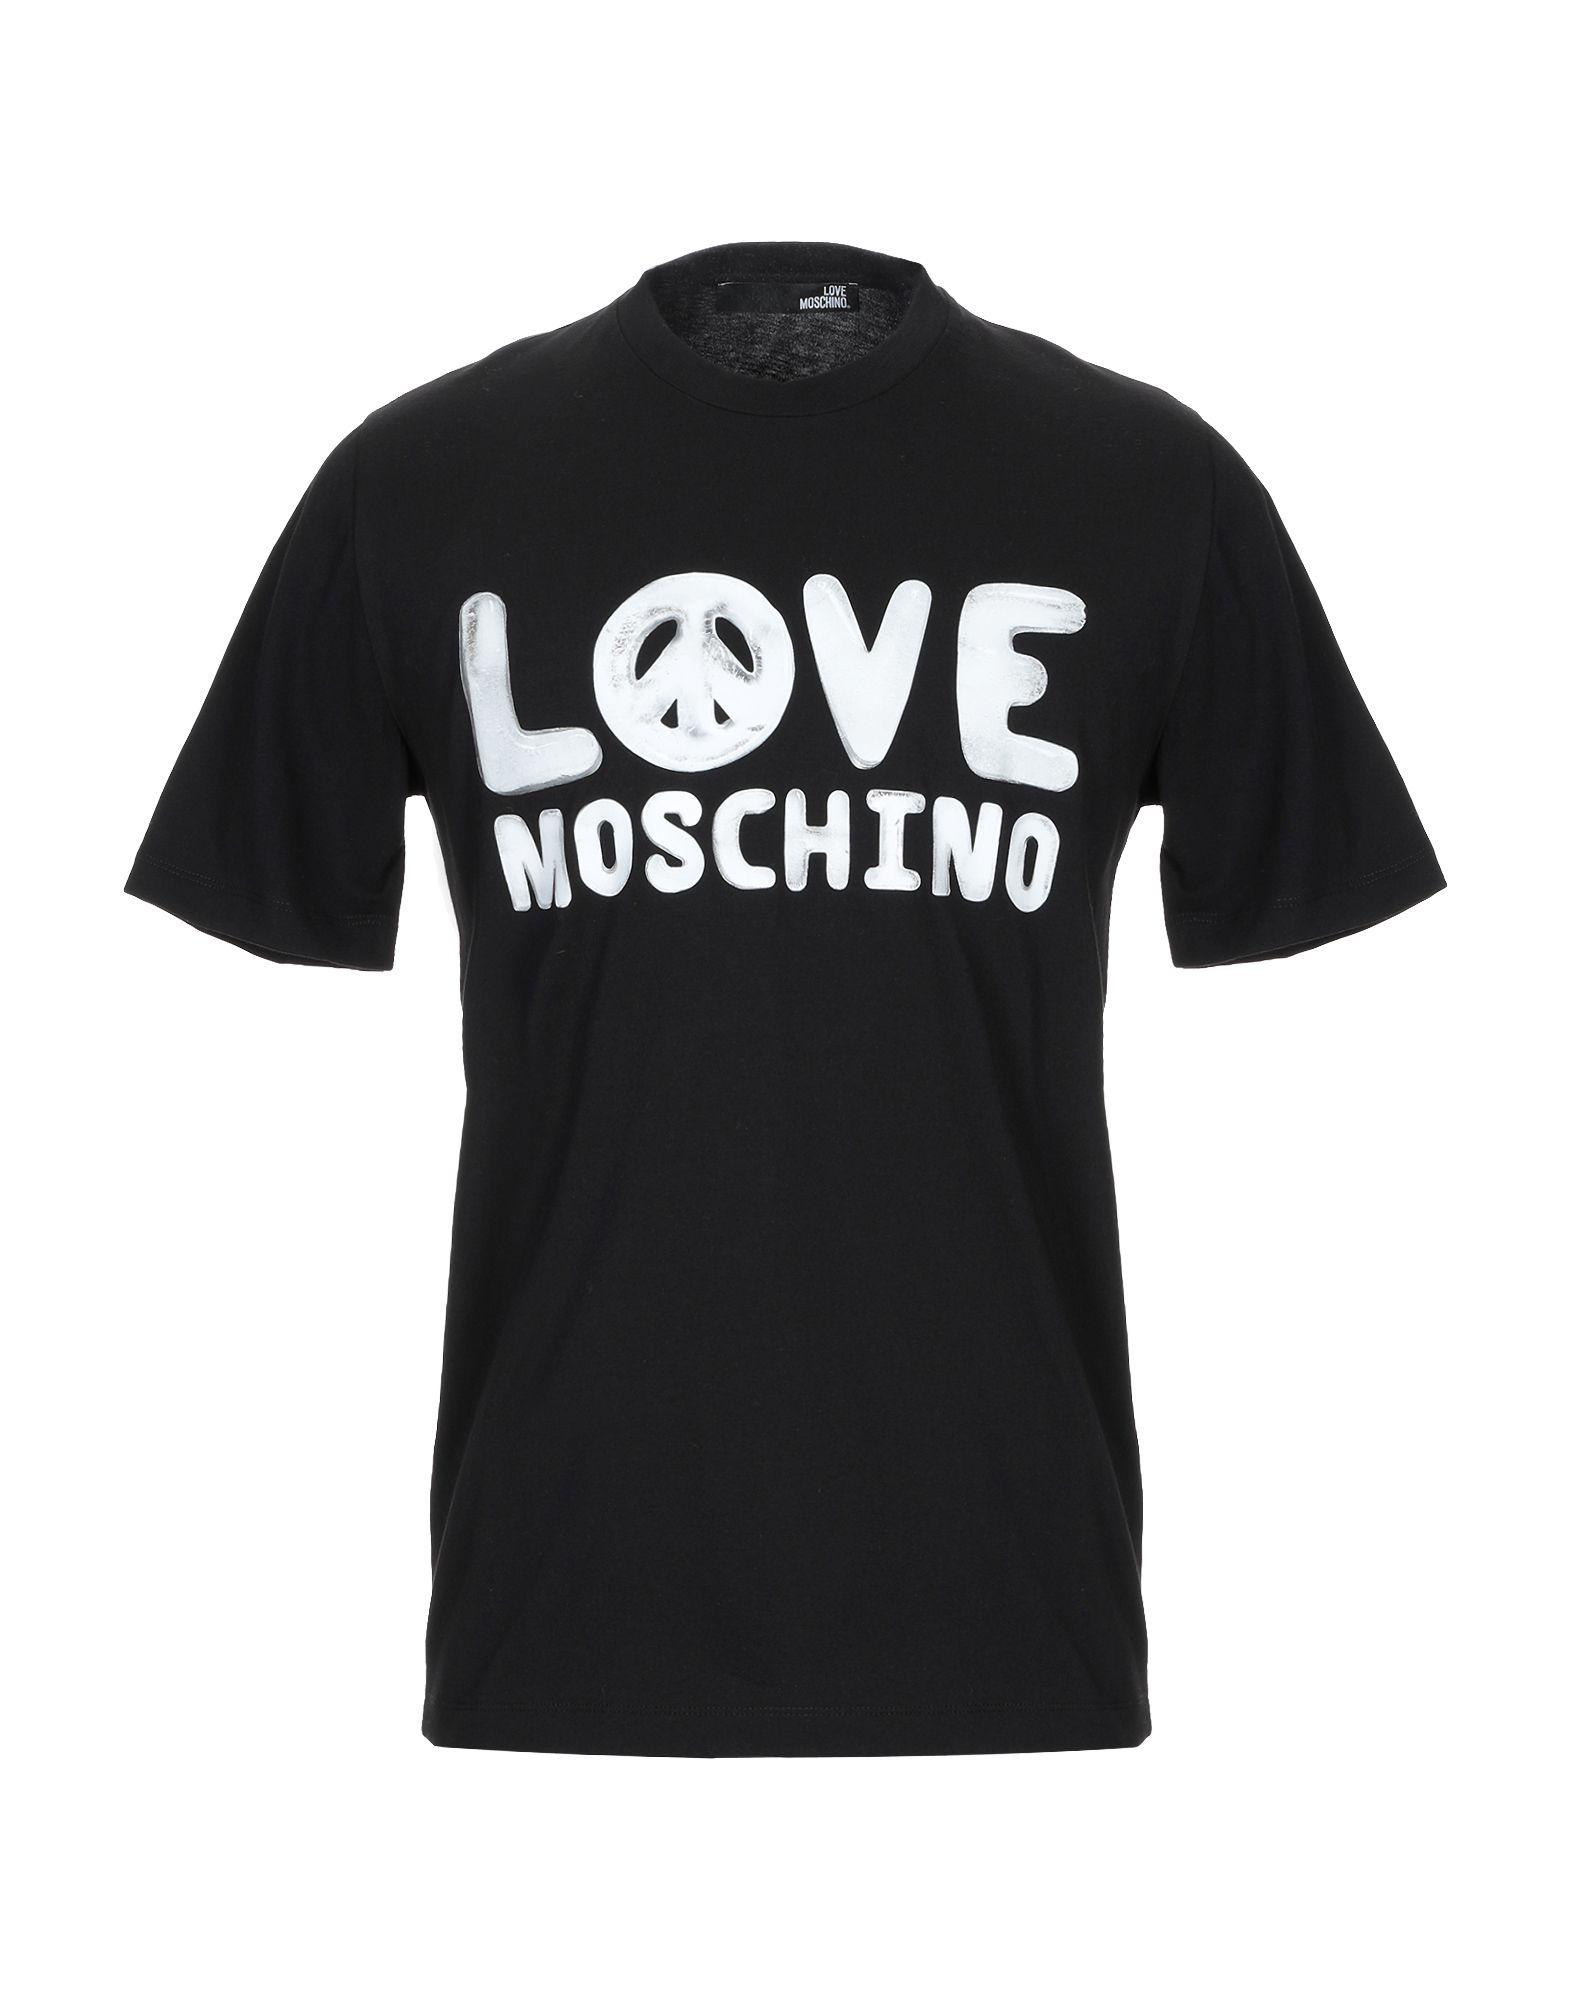 Love Moschino T-shirt in Black for Men - Lyst